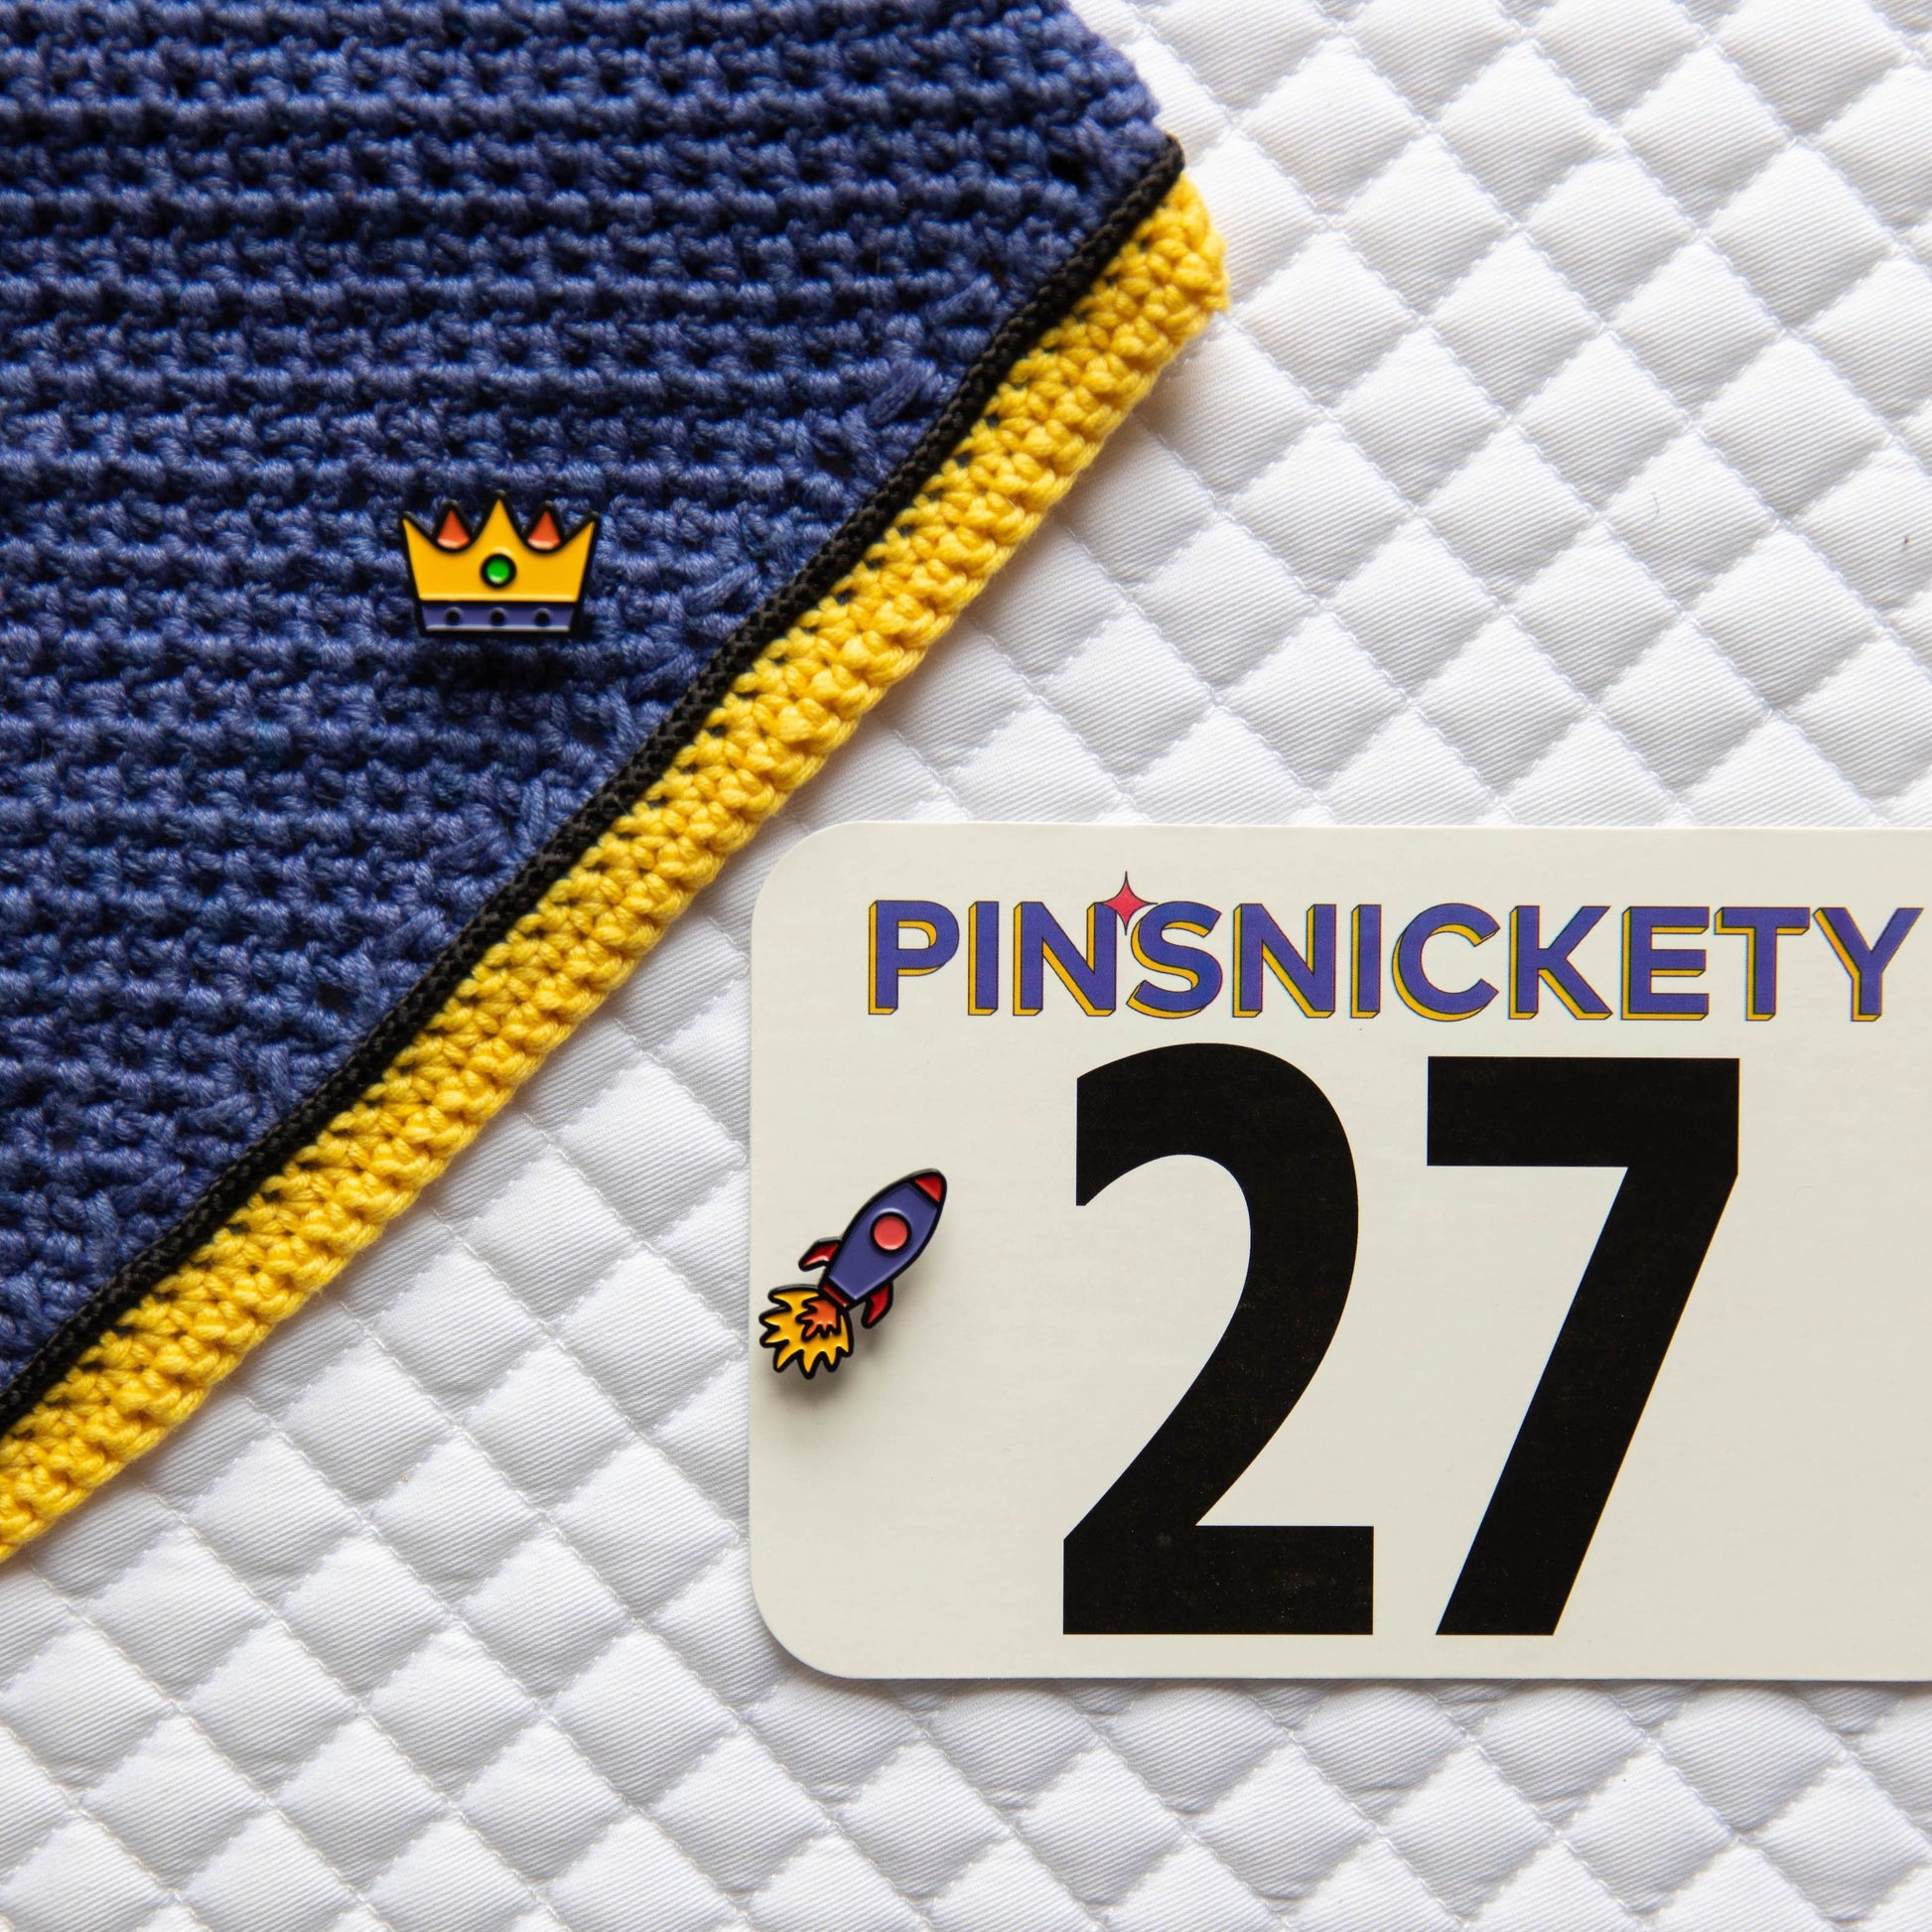 Pinsnickety's Rocket Ship pins paired with our Crown pin.